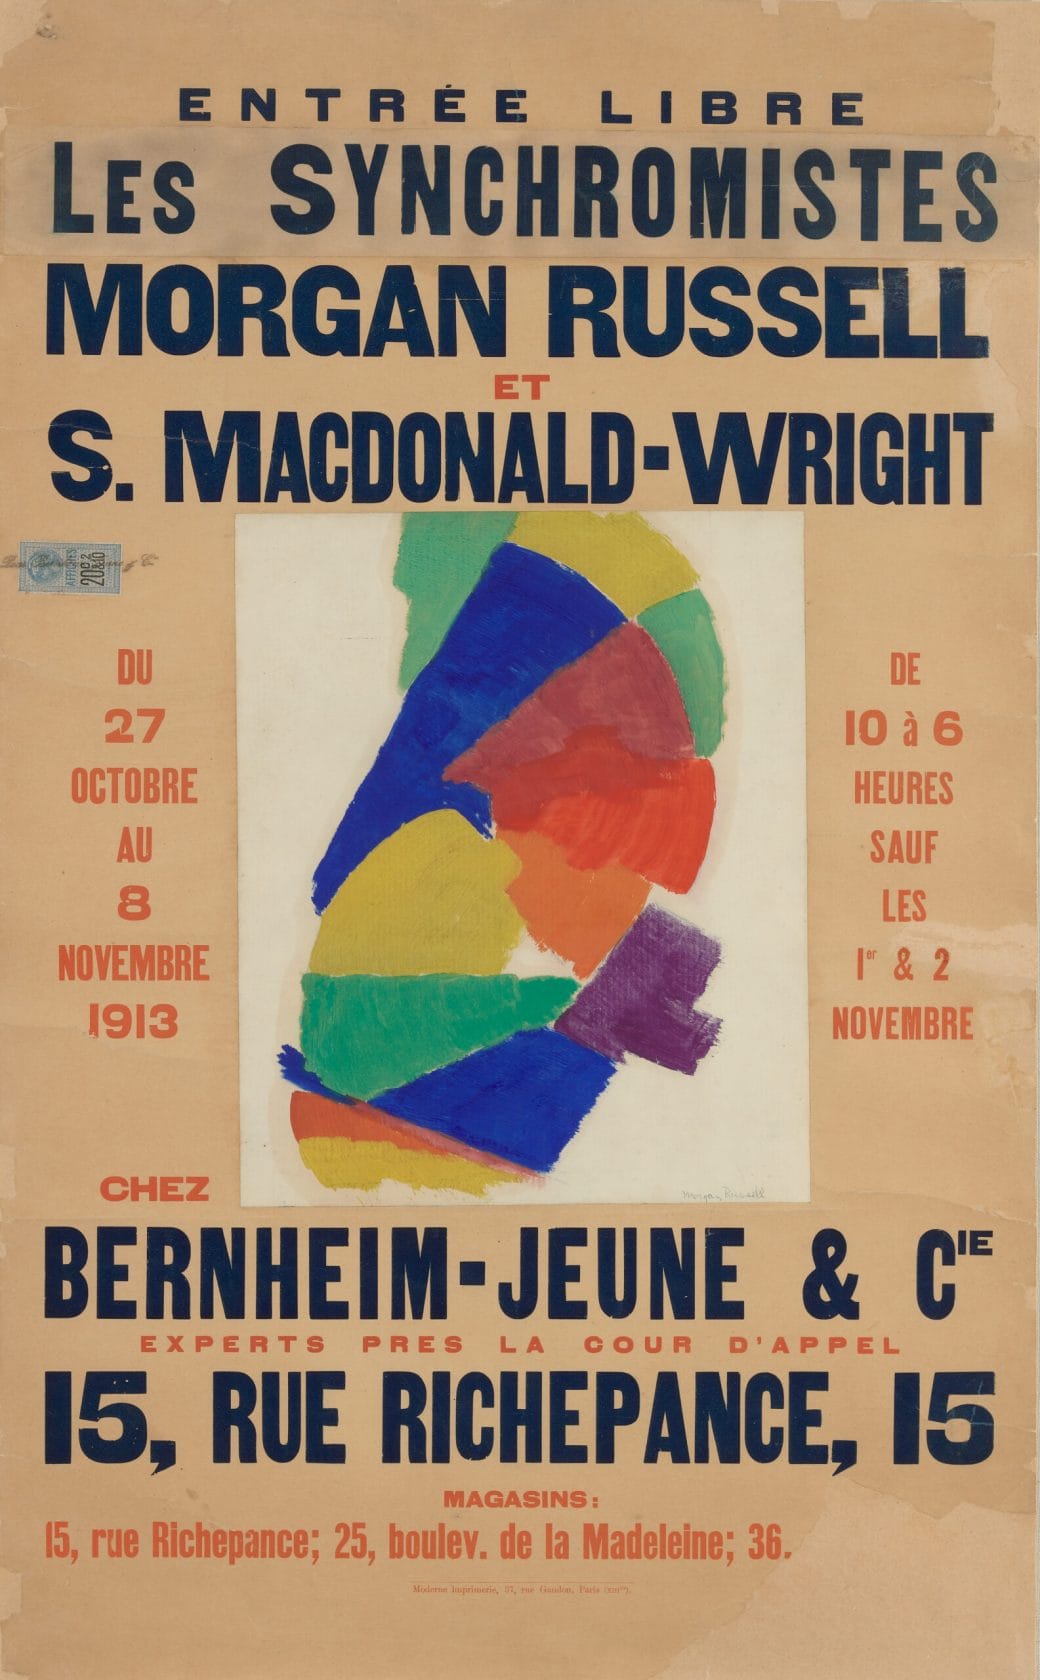 A French poster promoting the artists' exhibition with a formation of colors in the center.